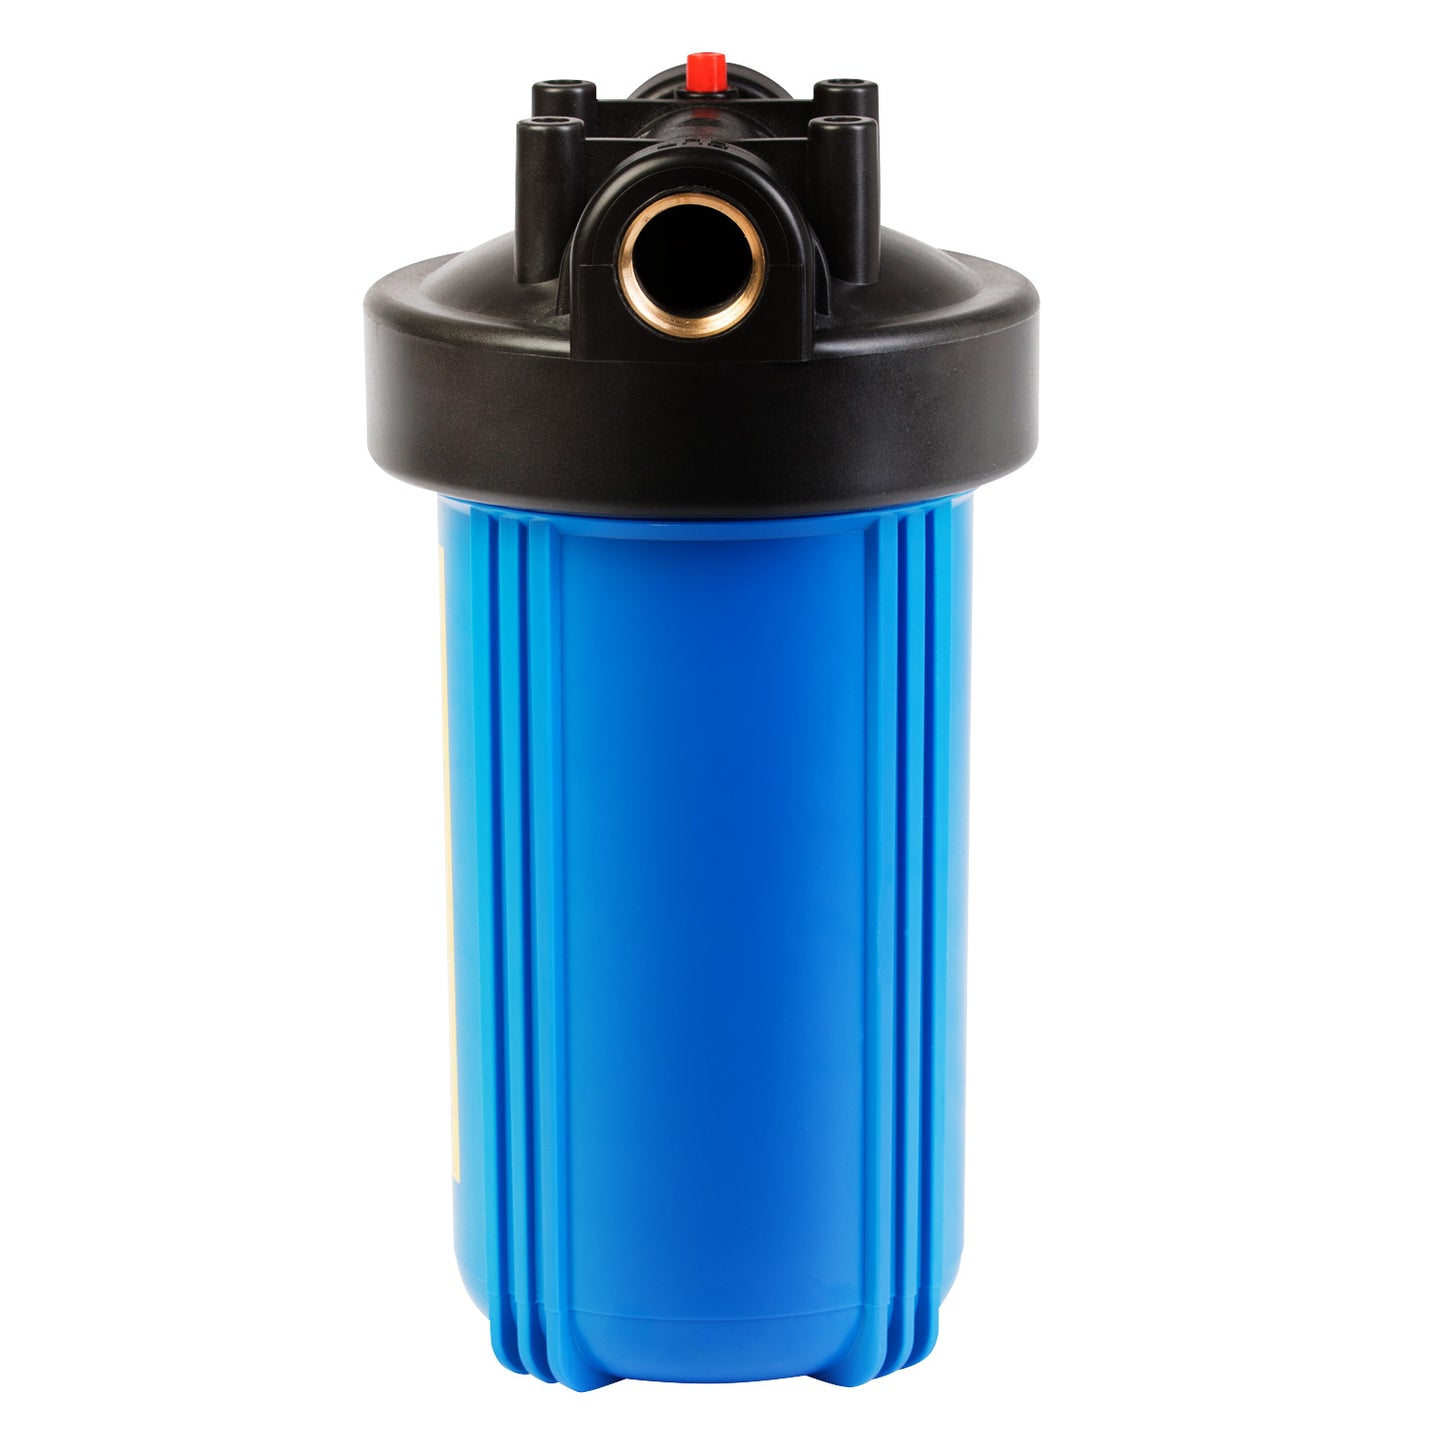 10 Inch Whole House Water Filter Housing -Fit for 4.5 "x10" Filters-Blue Color (Pack of 2)